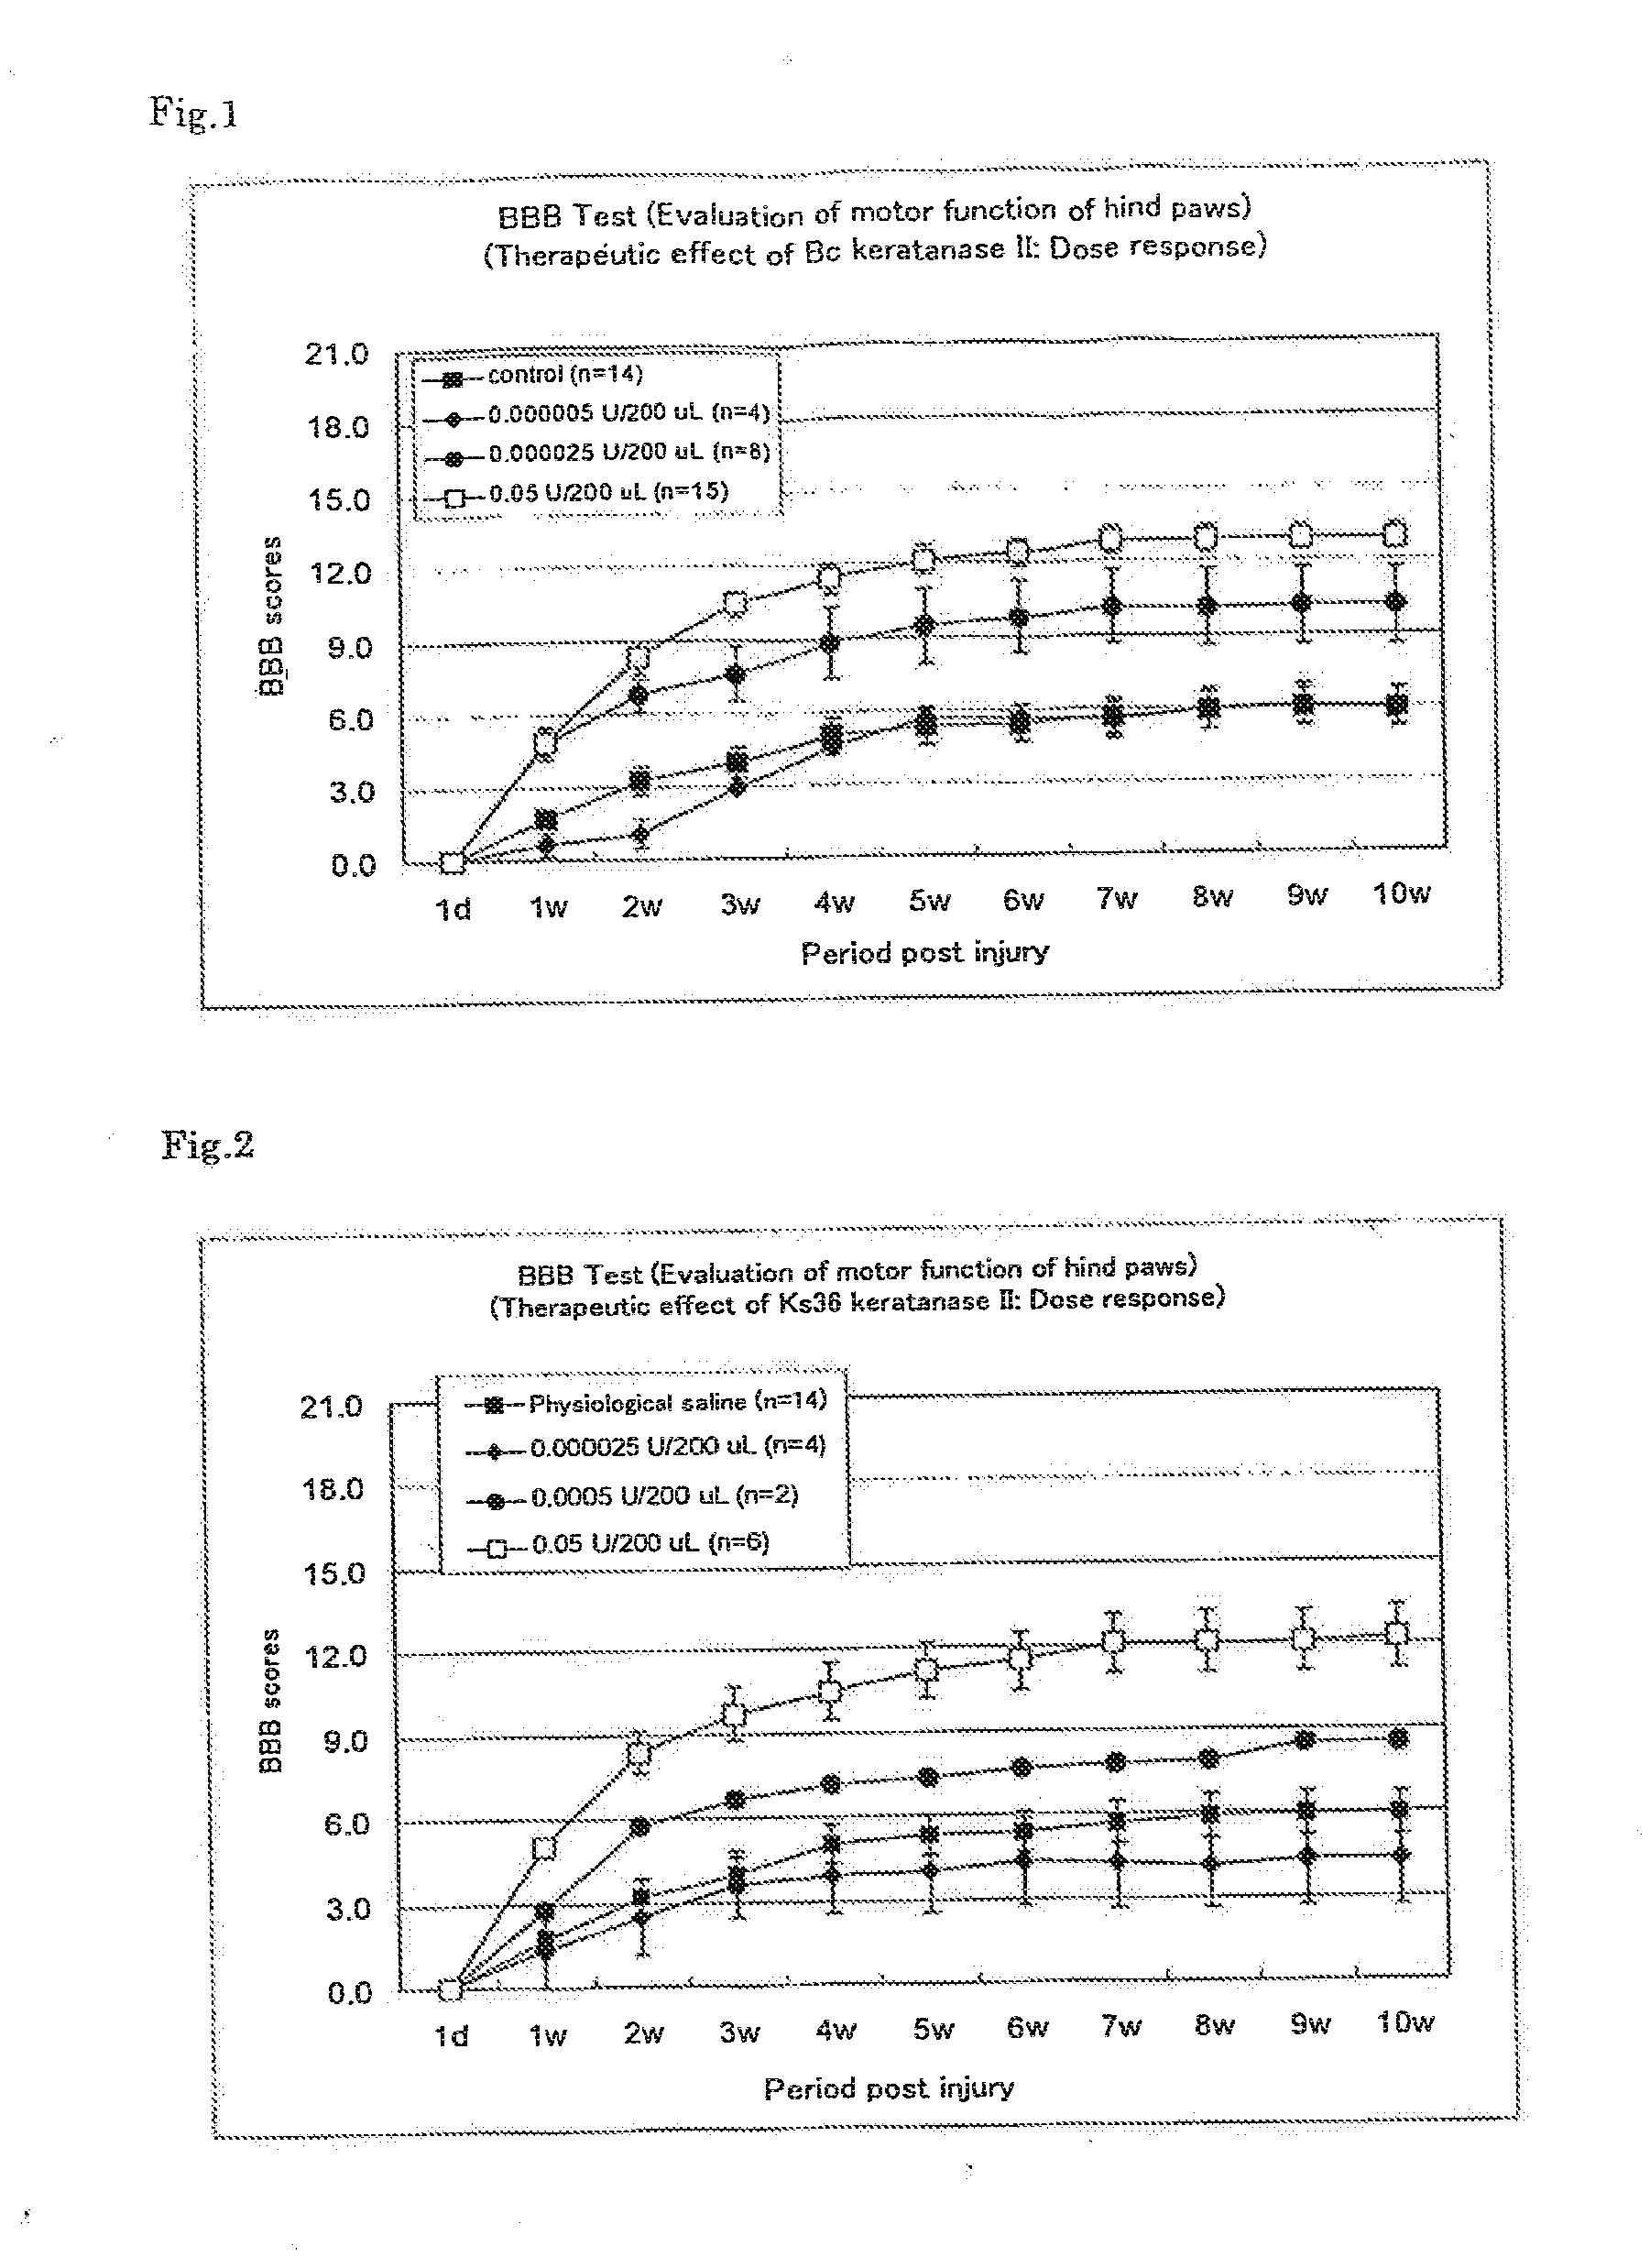 AGENT FOR DYSFUNCTION DUE TO NEUROPATHY AND Rho KINASE ACTIVATION INHIBITOR